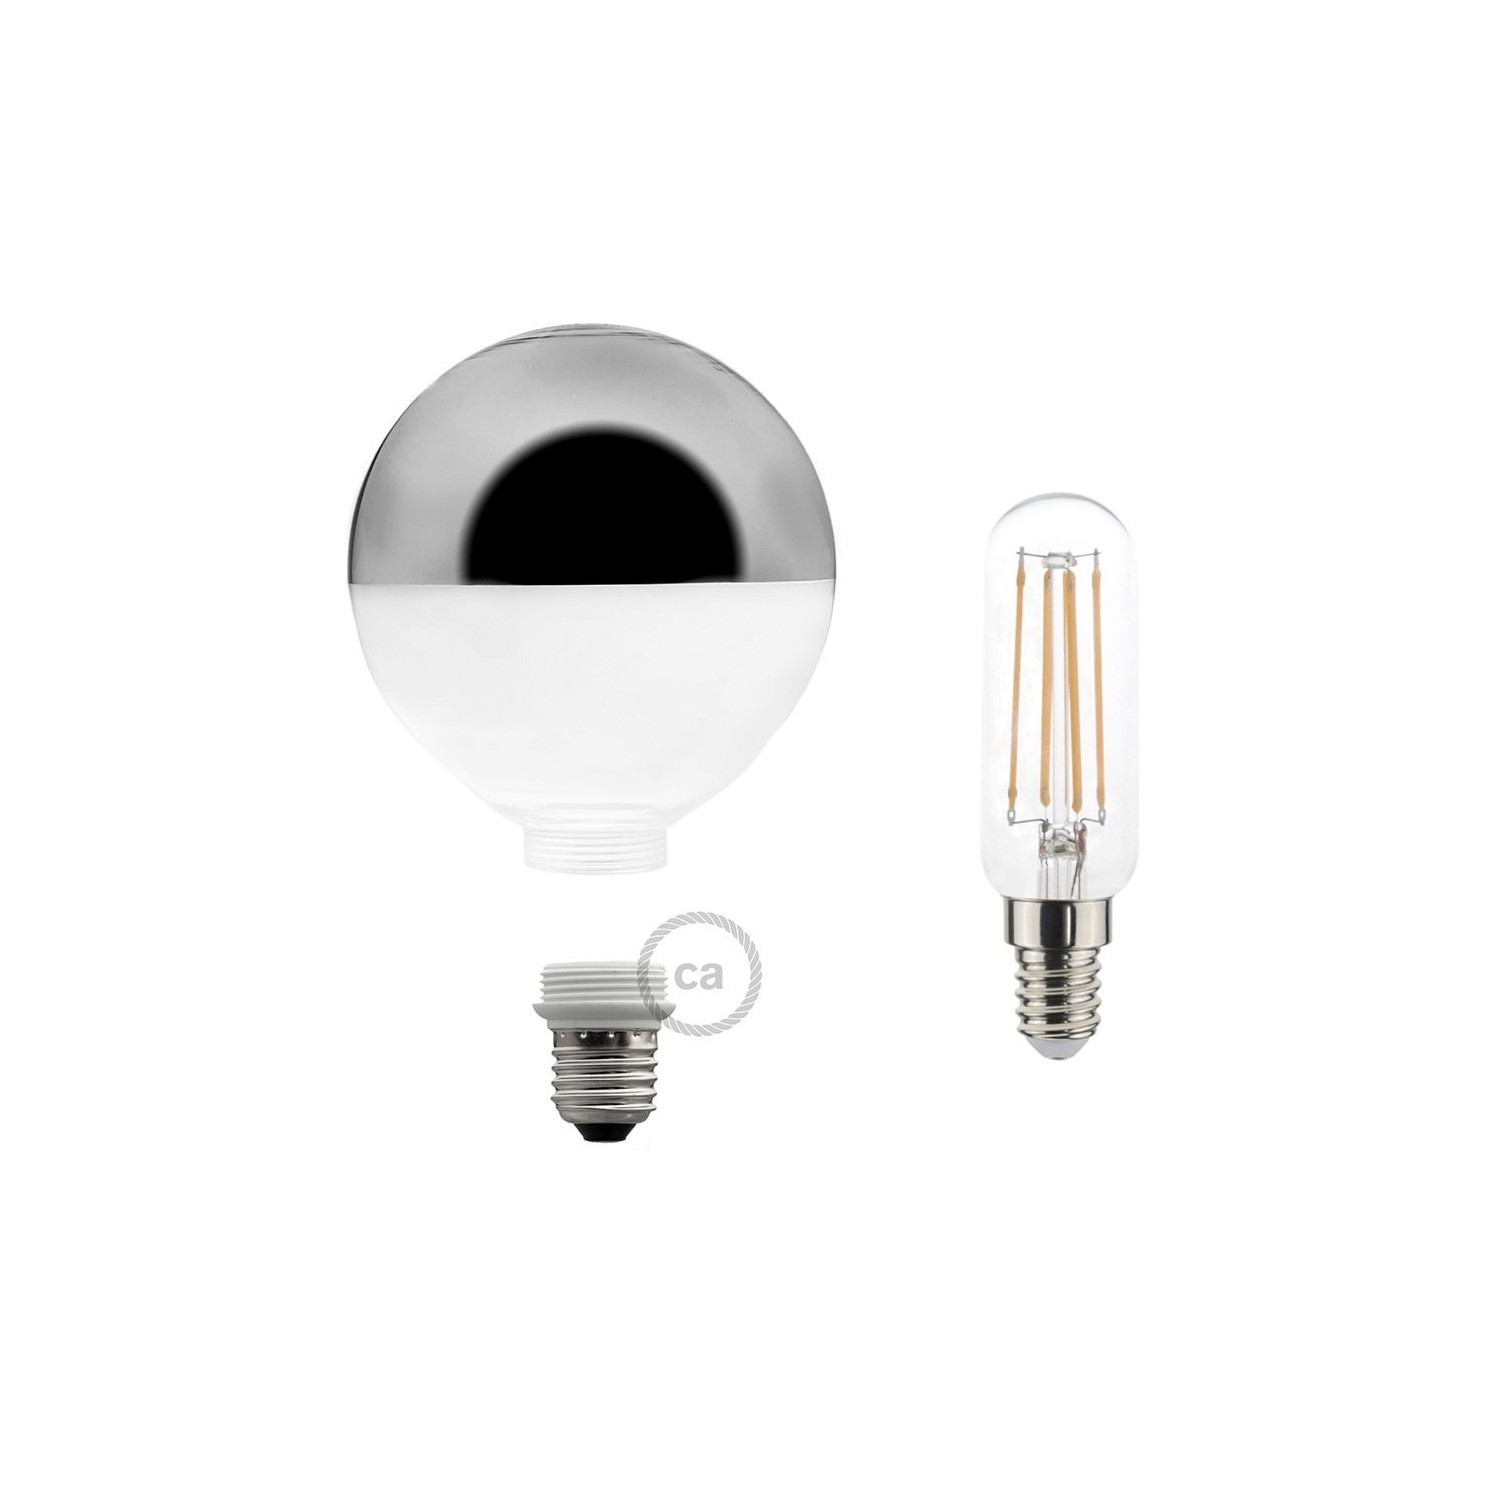 Modular LED Decorative Light bulb with Silver Semisphere 4,5W E27 Dimmable 2700K